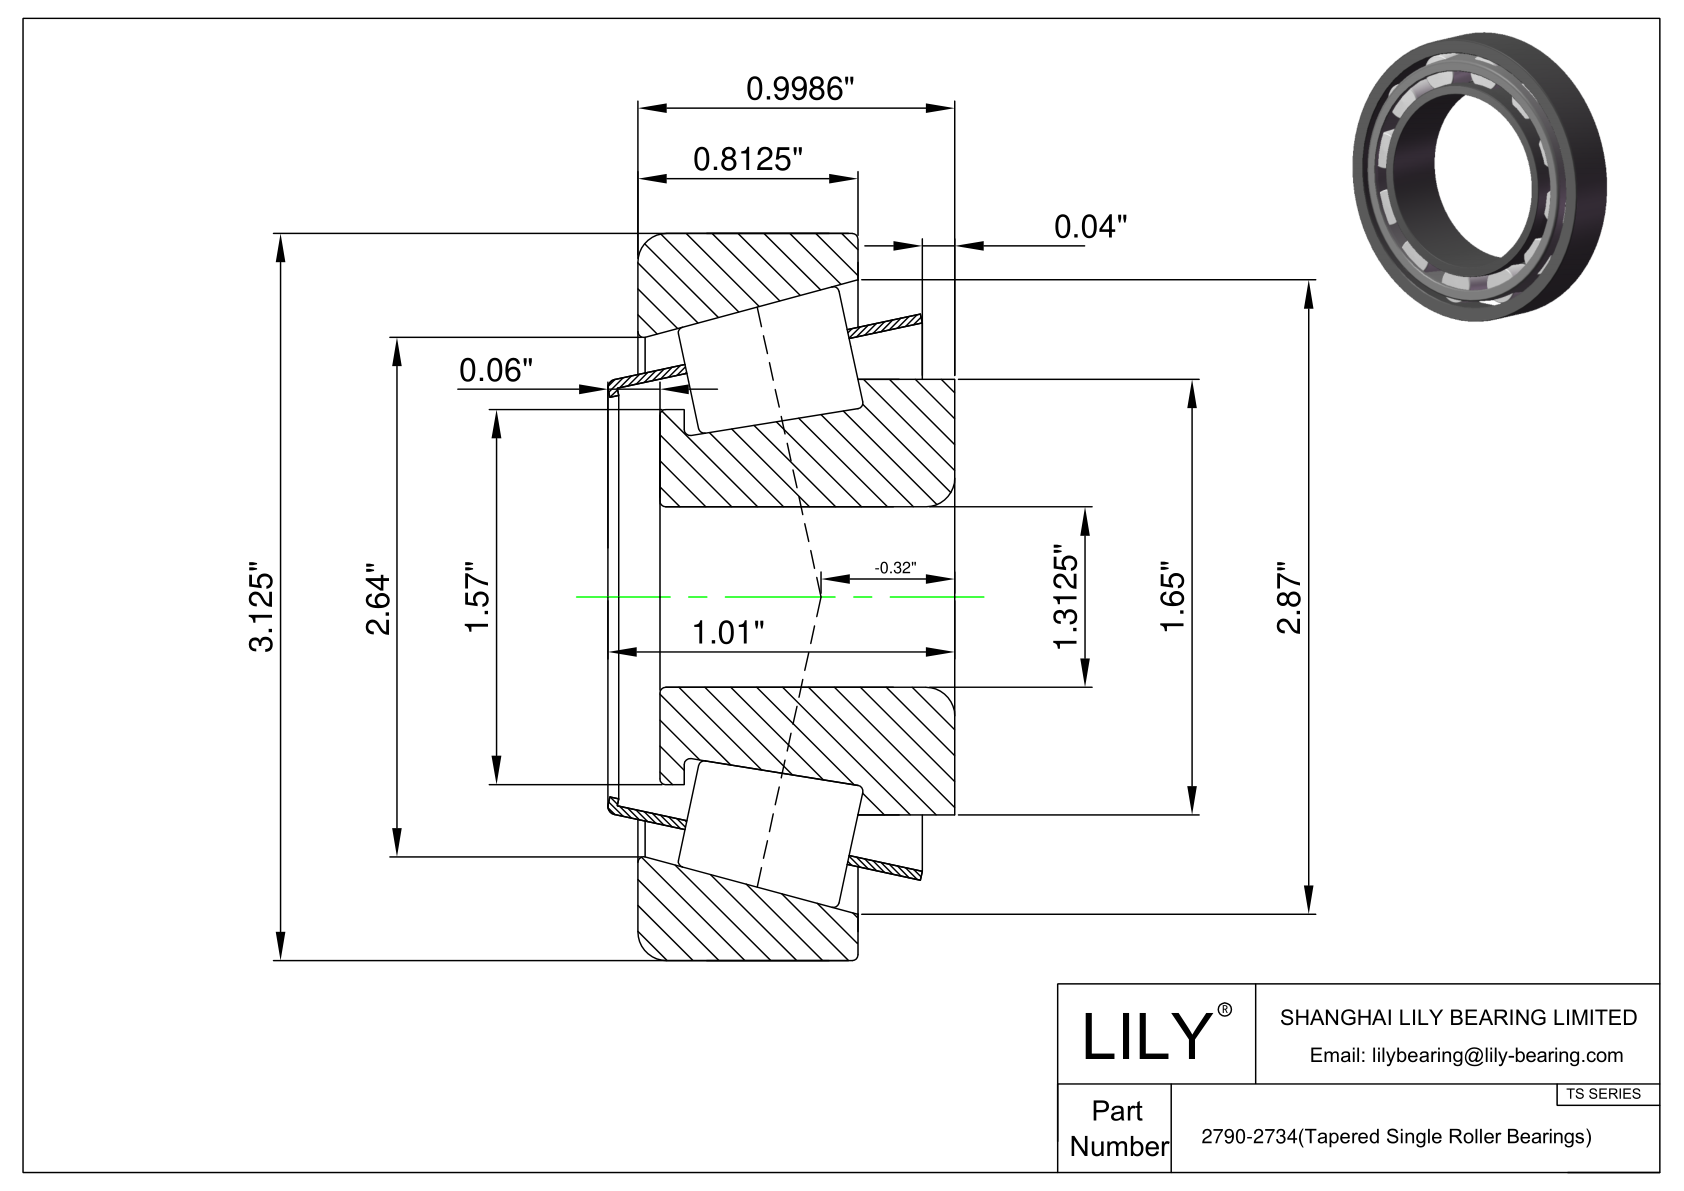 2790-2734 TS (Tapered Single Roller Bearings) (Imperial) cad drawing